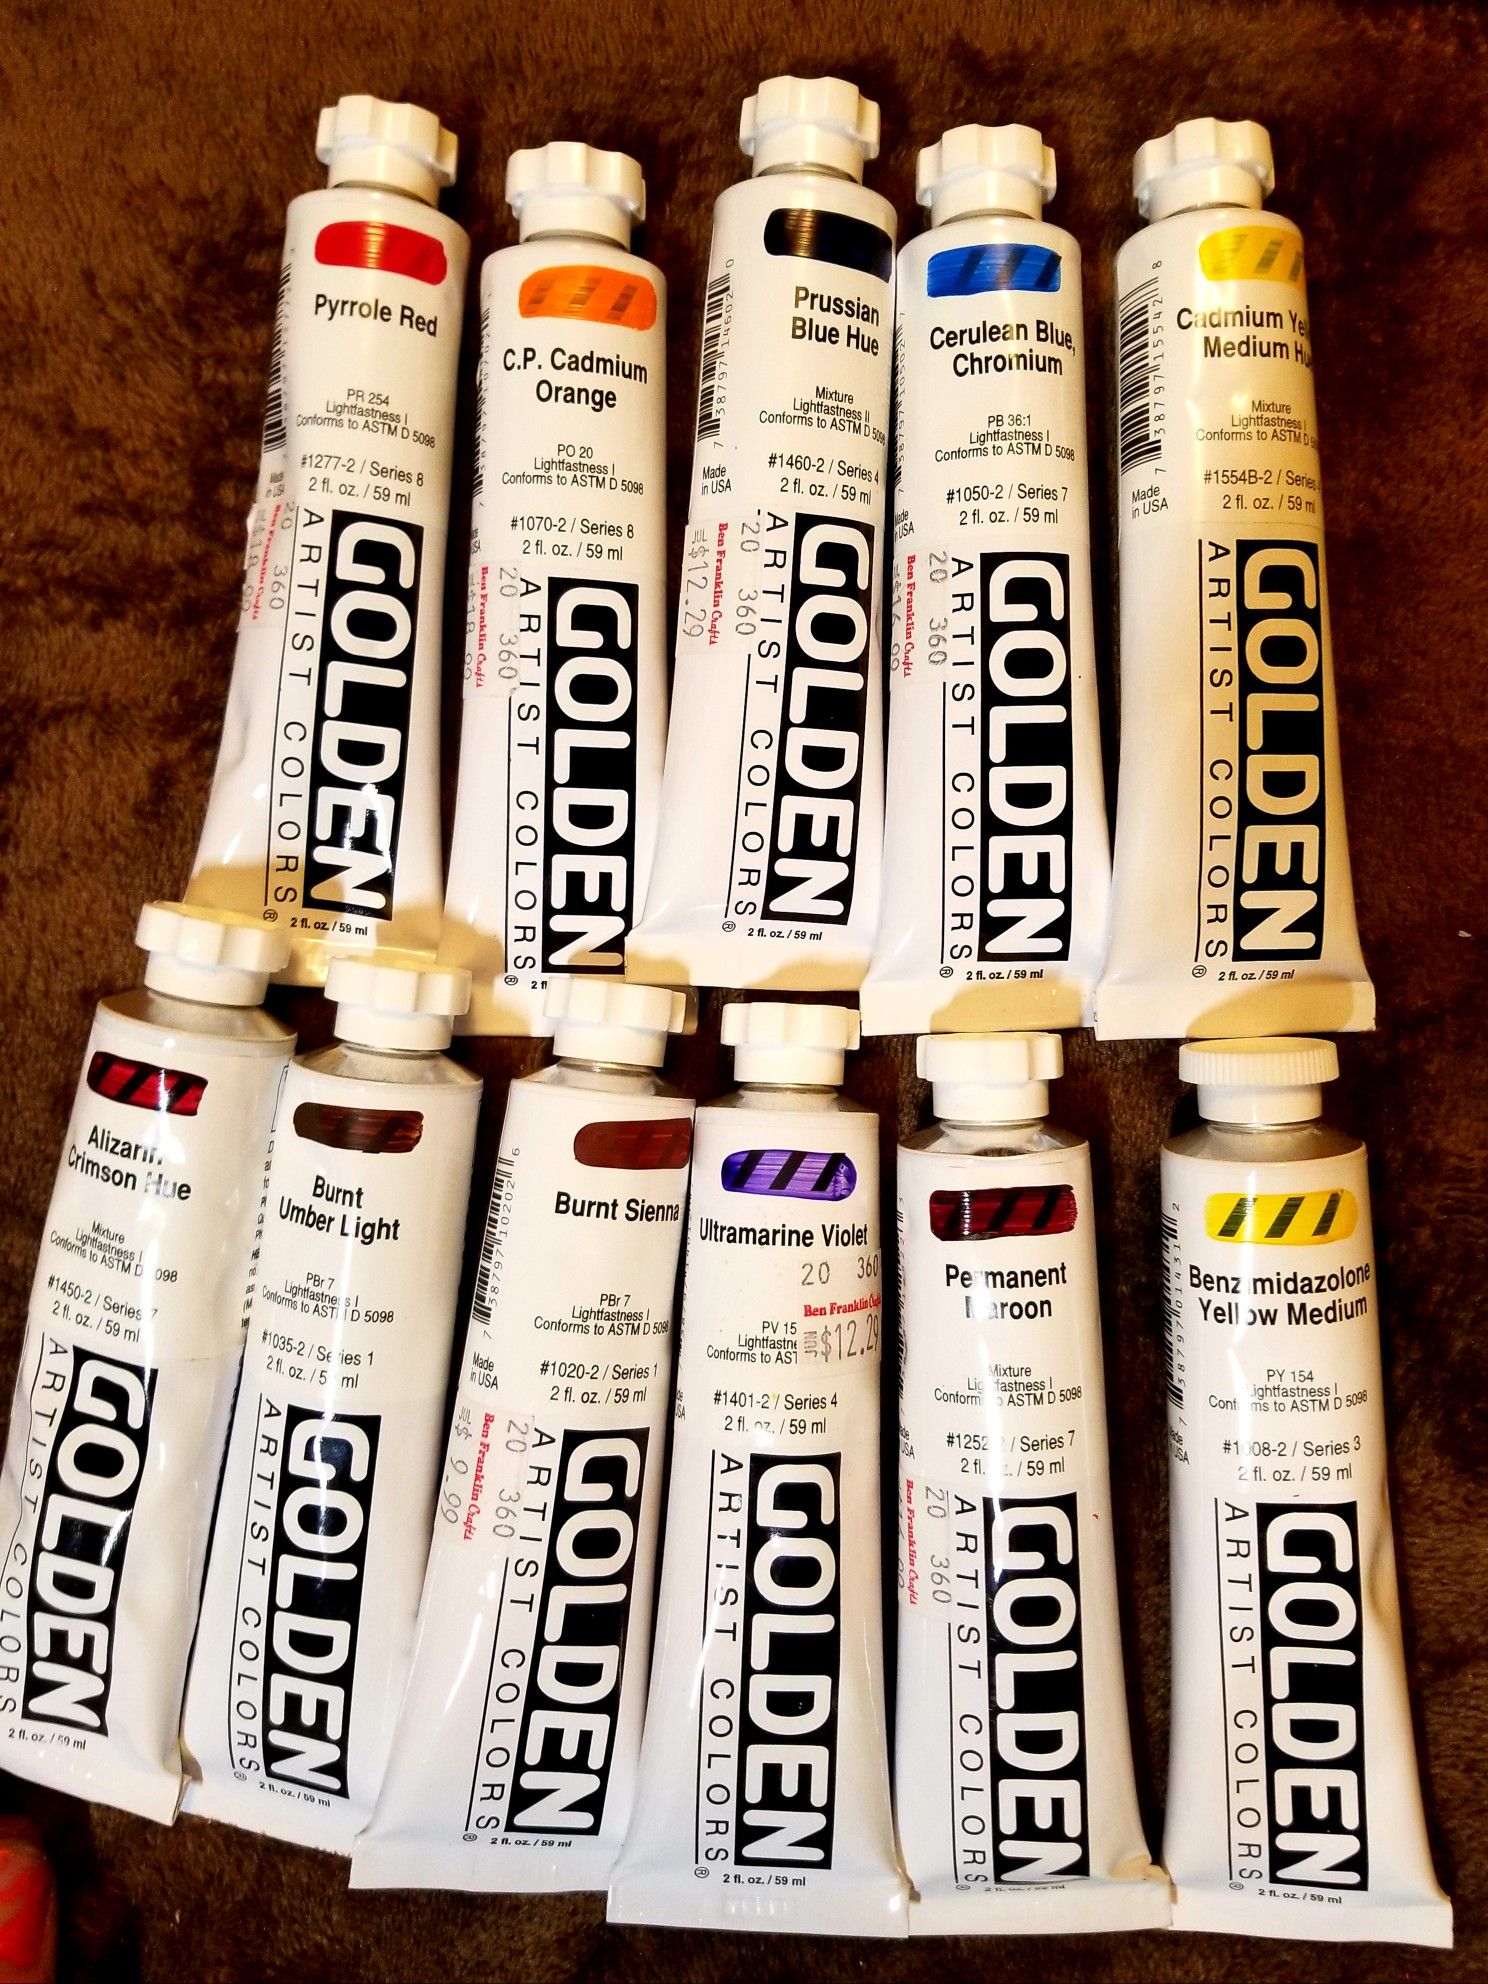 11 BRAND NEW tubes of GOLDEN Acrylic Paint.